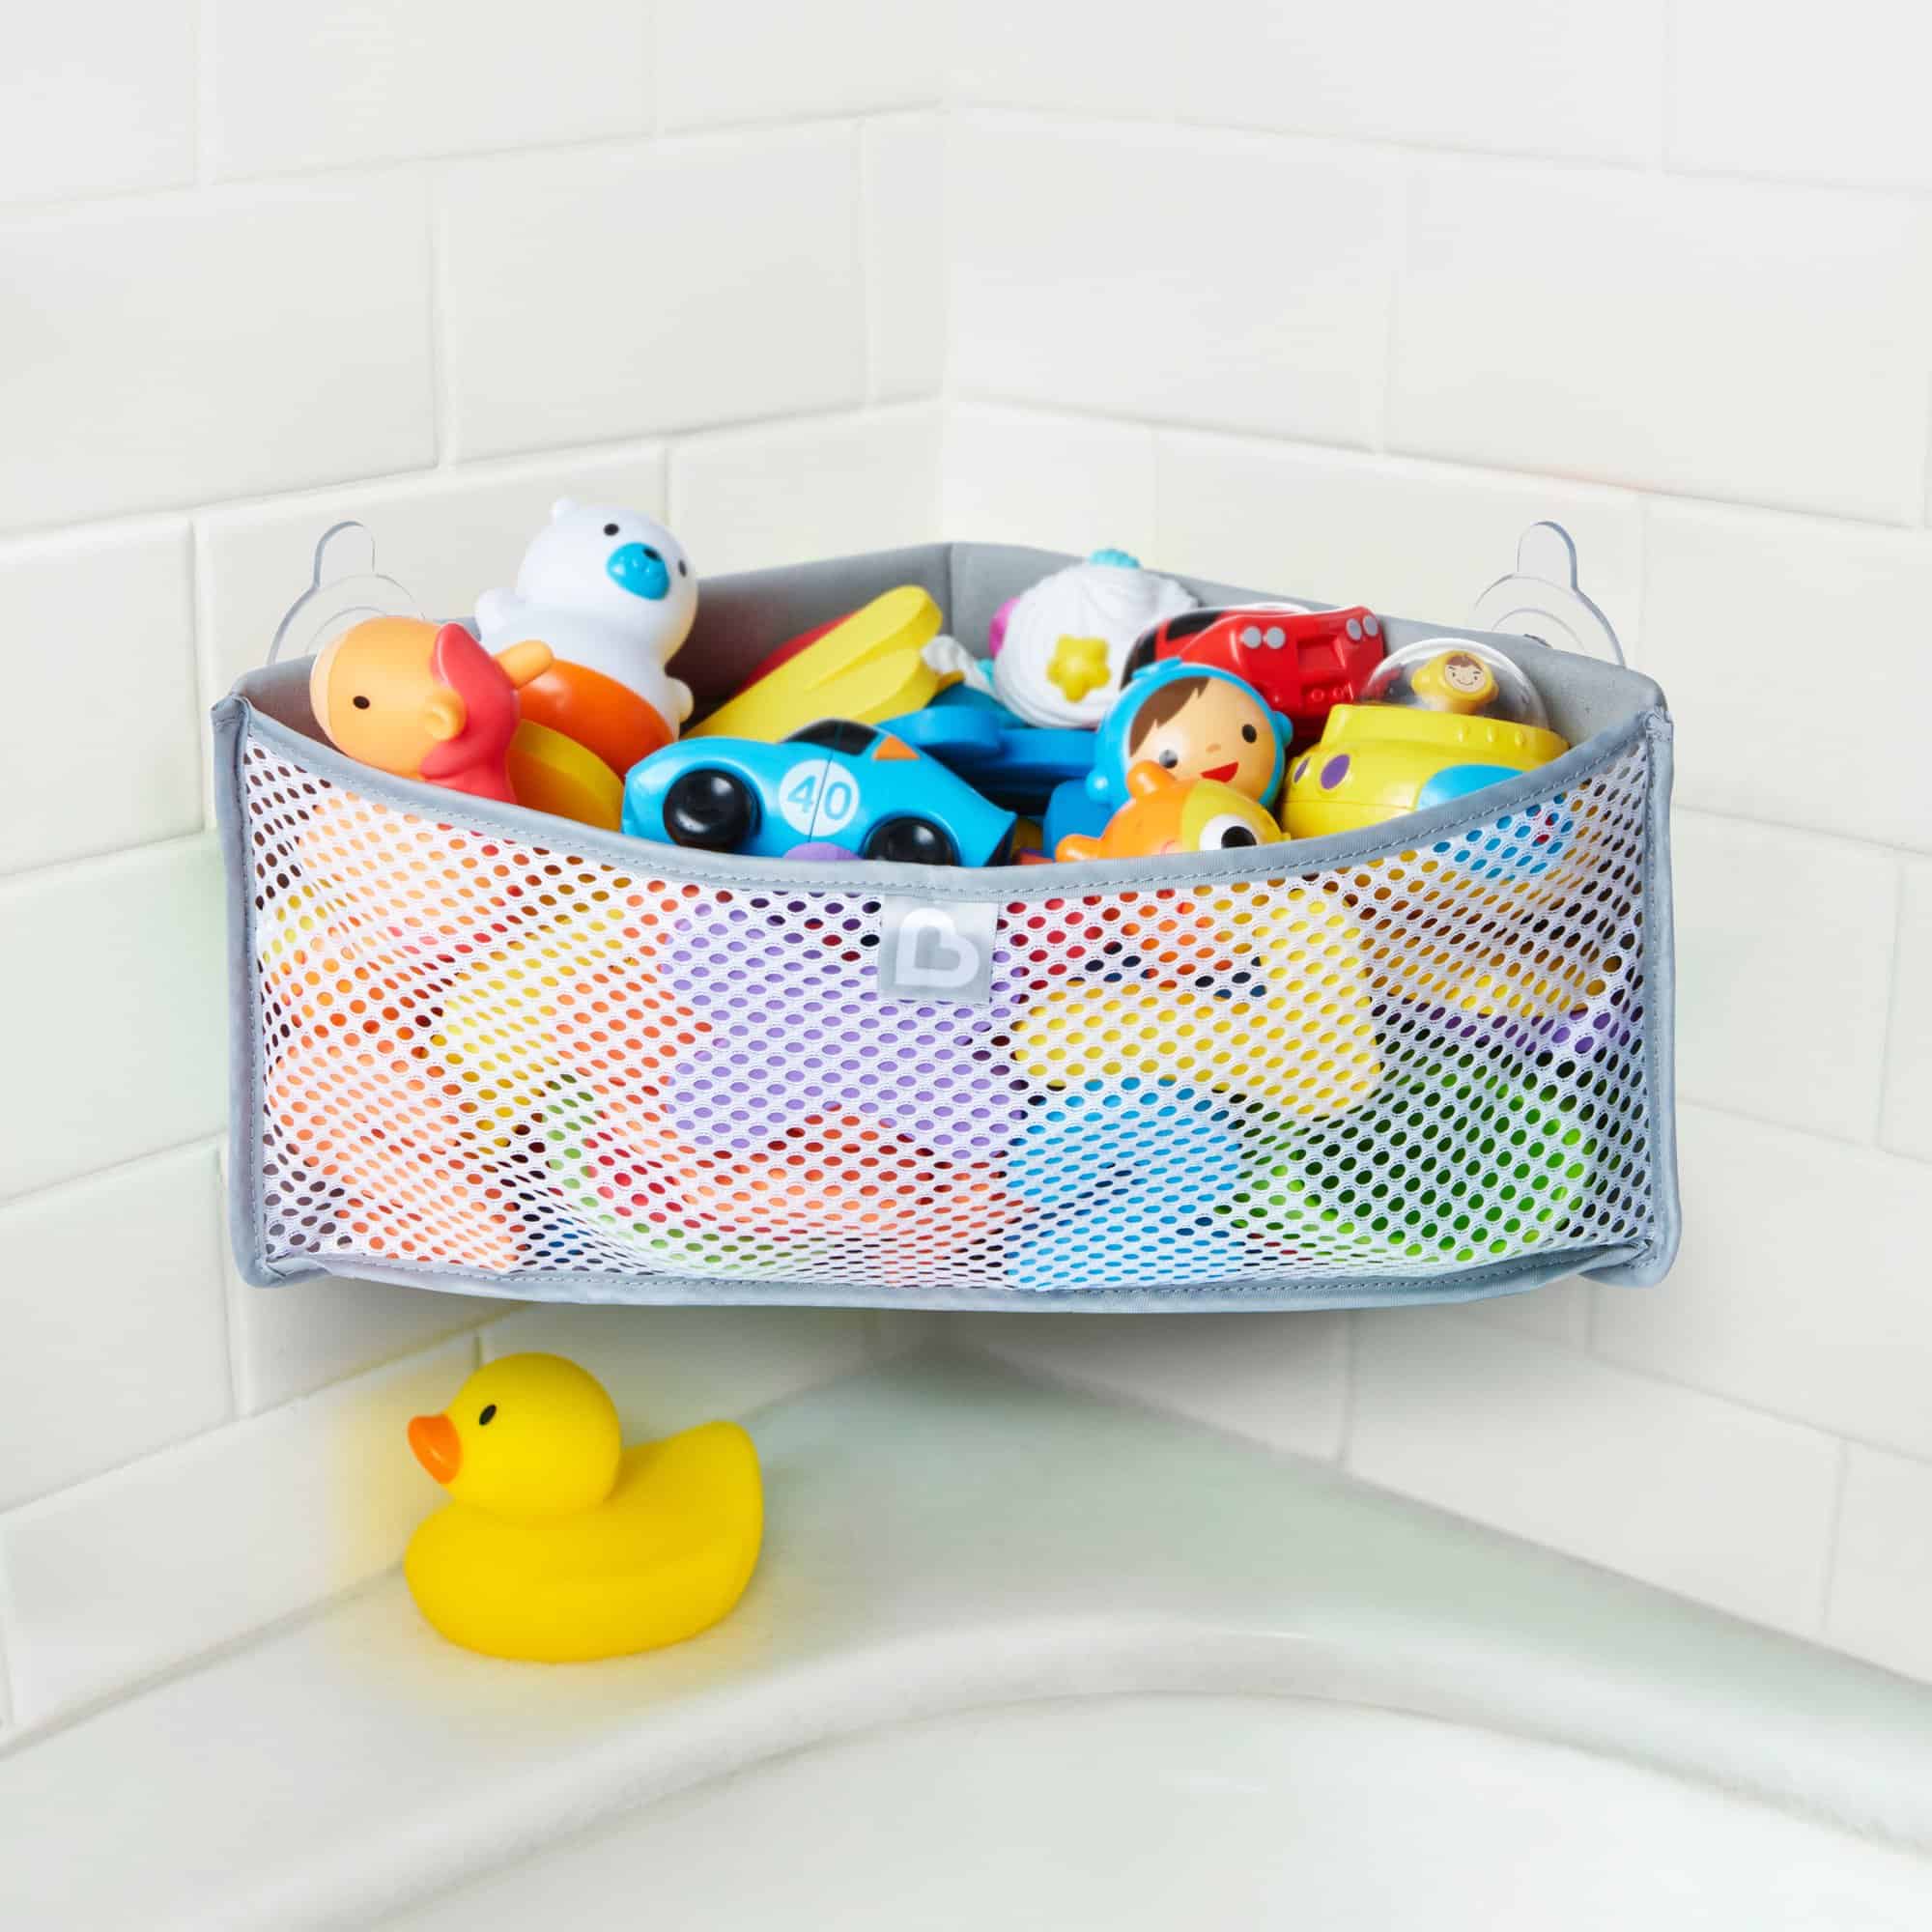 Use a shower rod and dollar store baskets to keep bath toys organized.